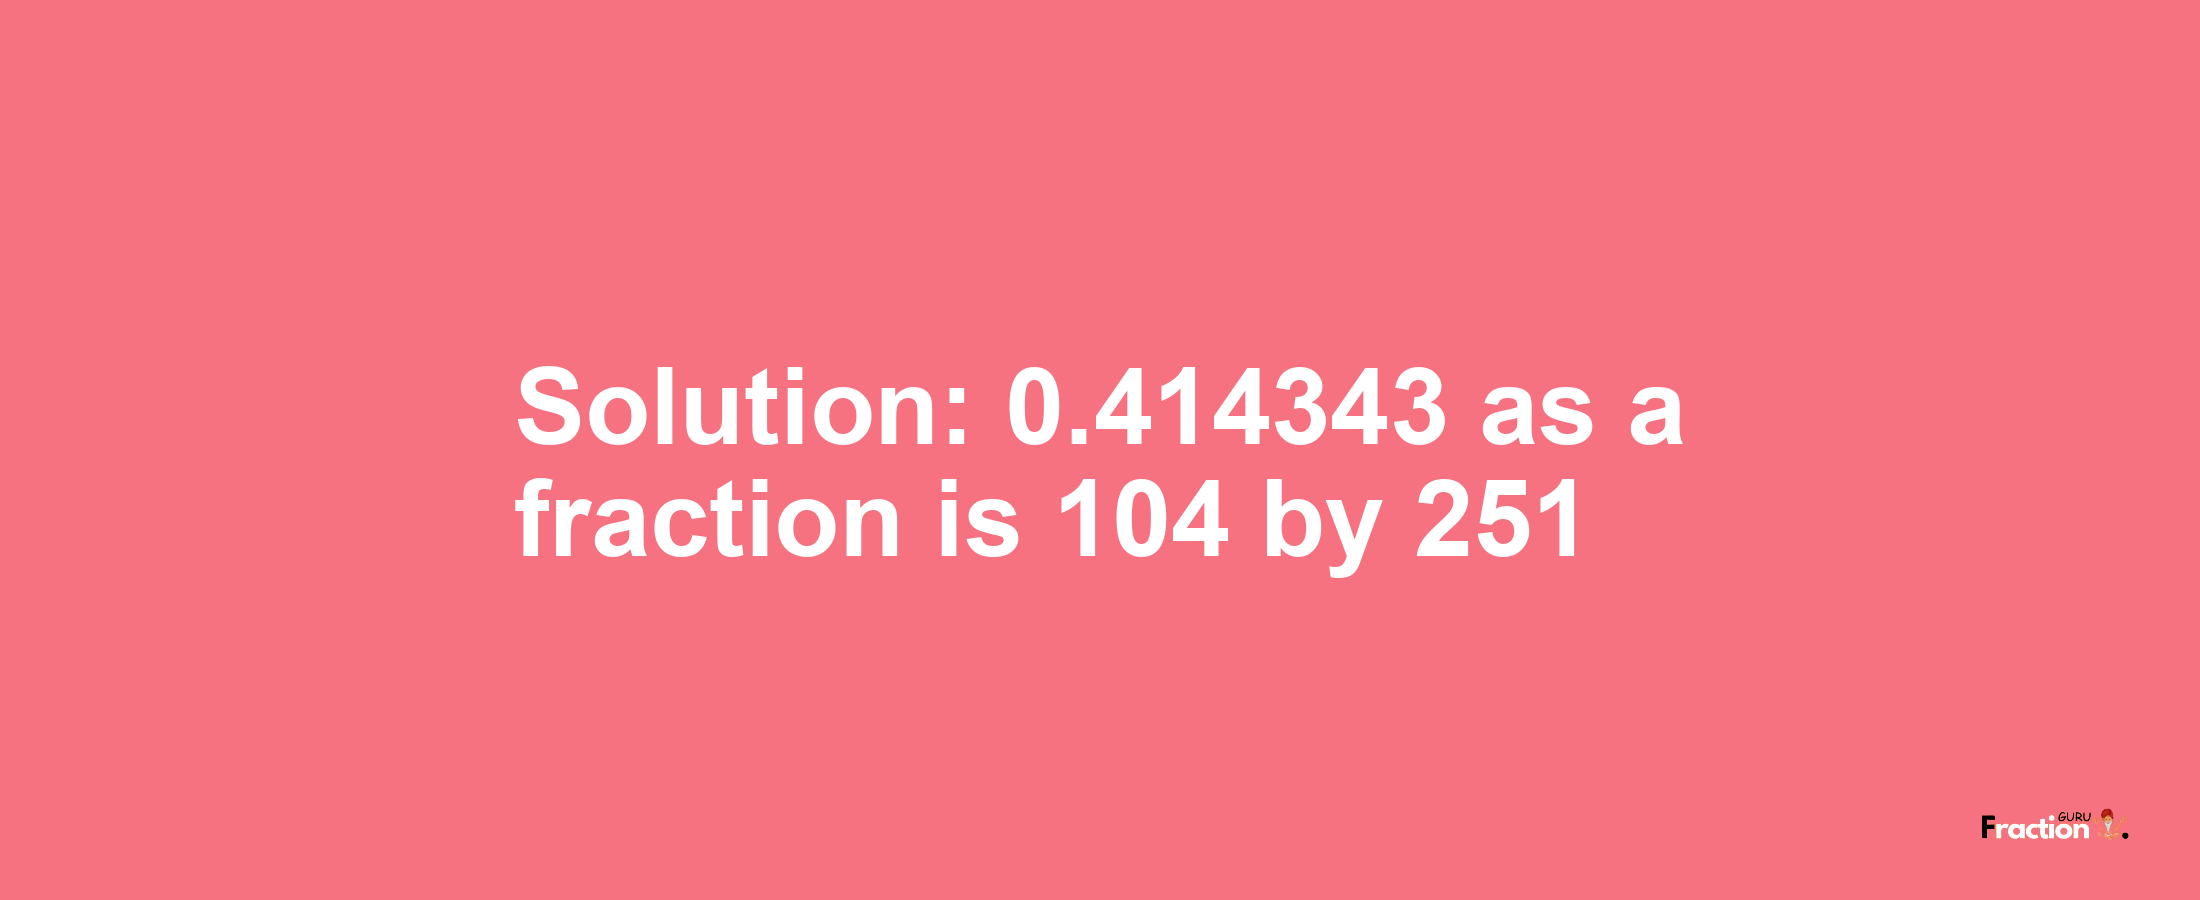 Solution:0.414343 as a fraction is 104/251